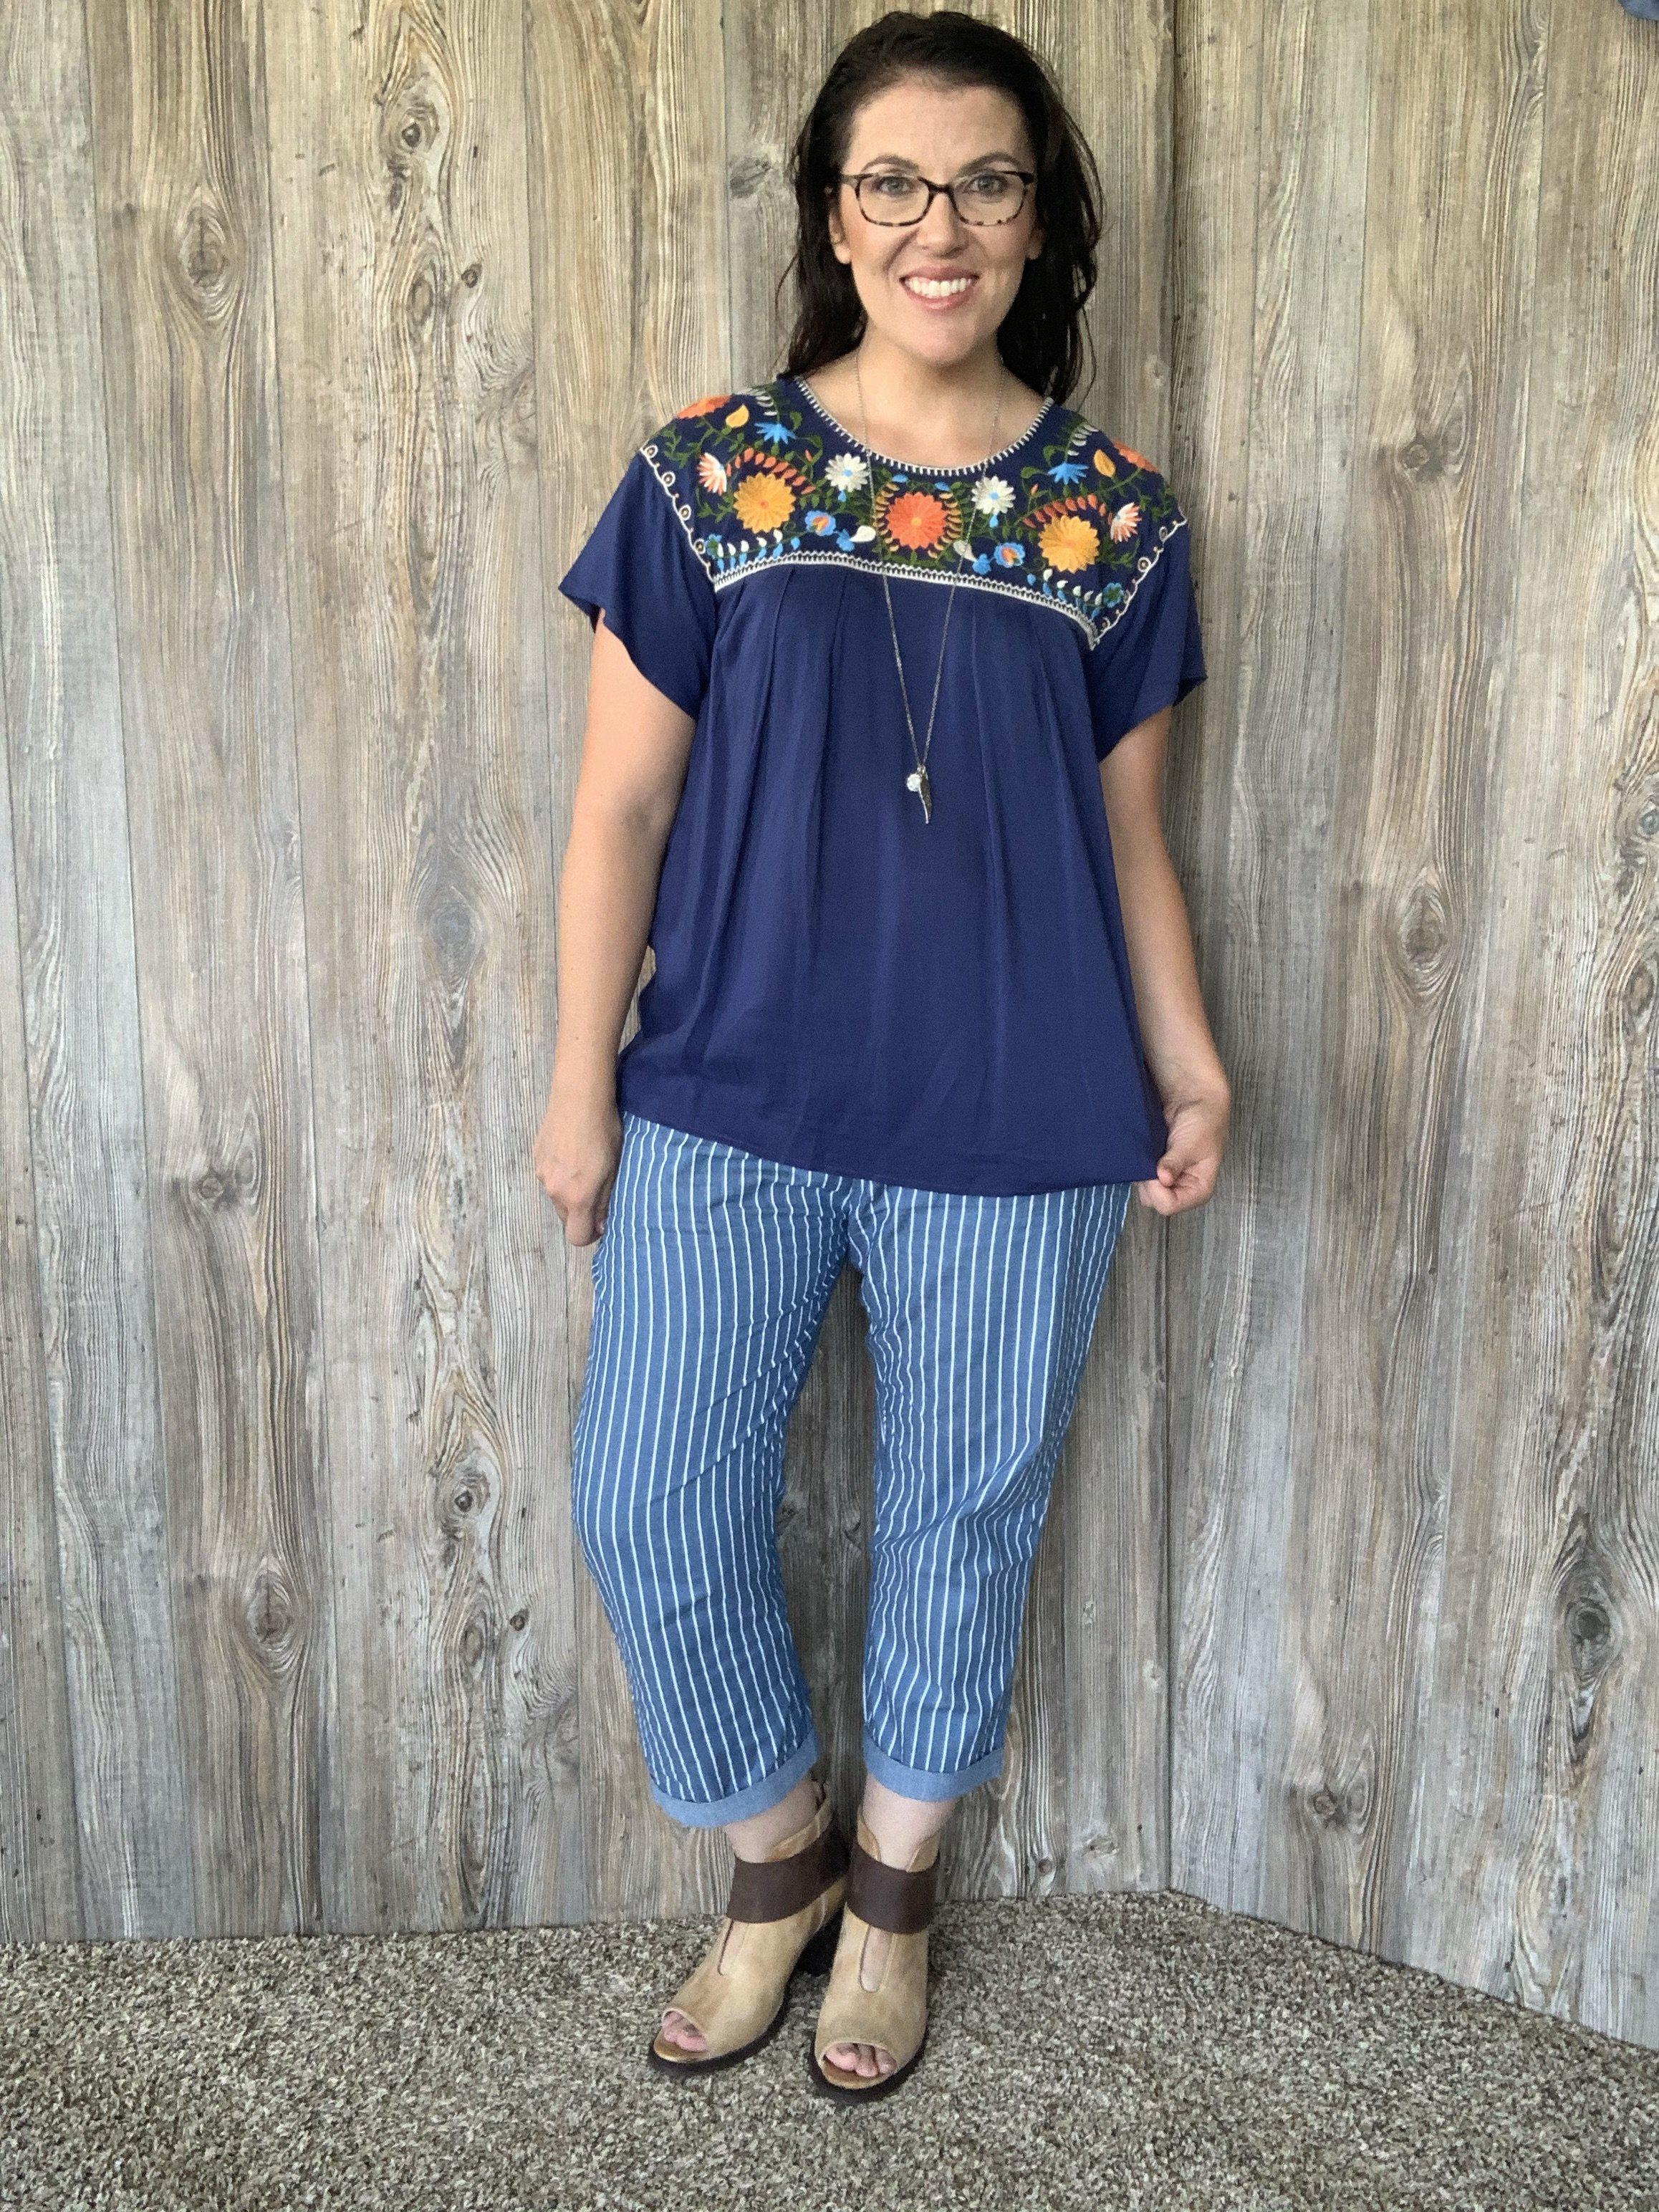 Multi-Colored Embroidered Navy Top